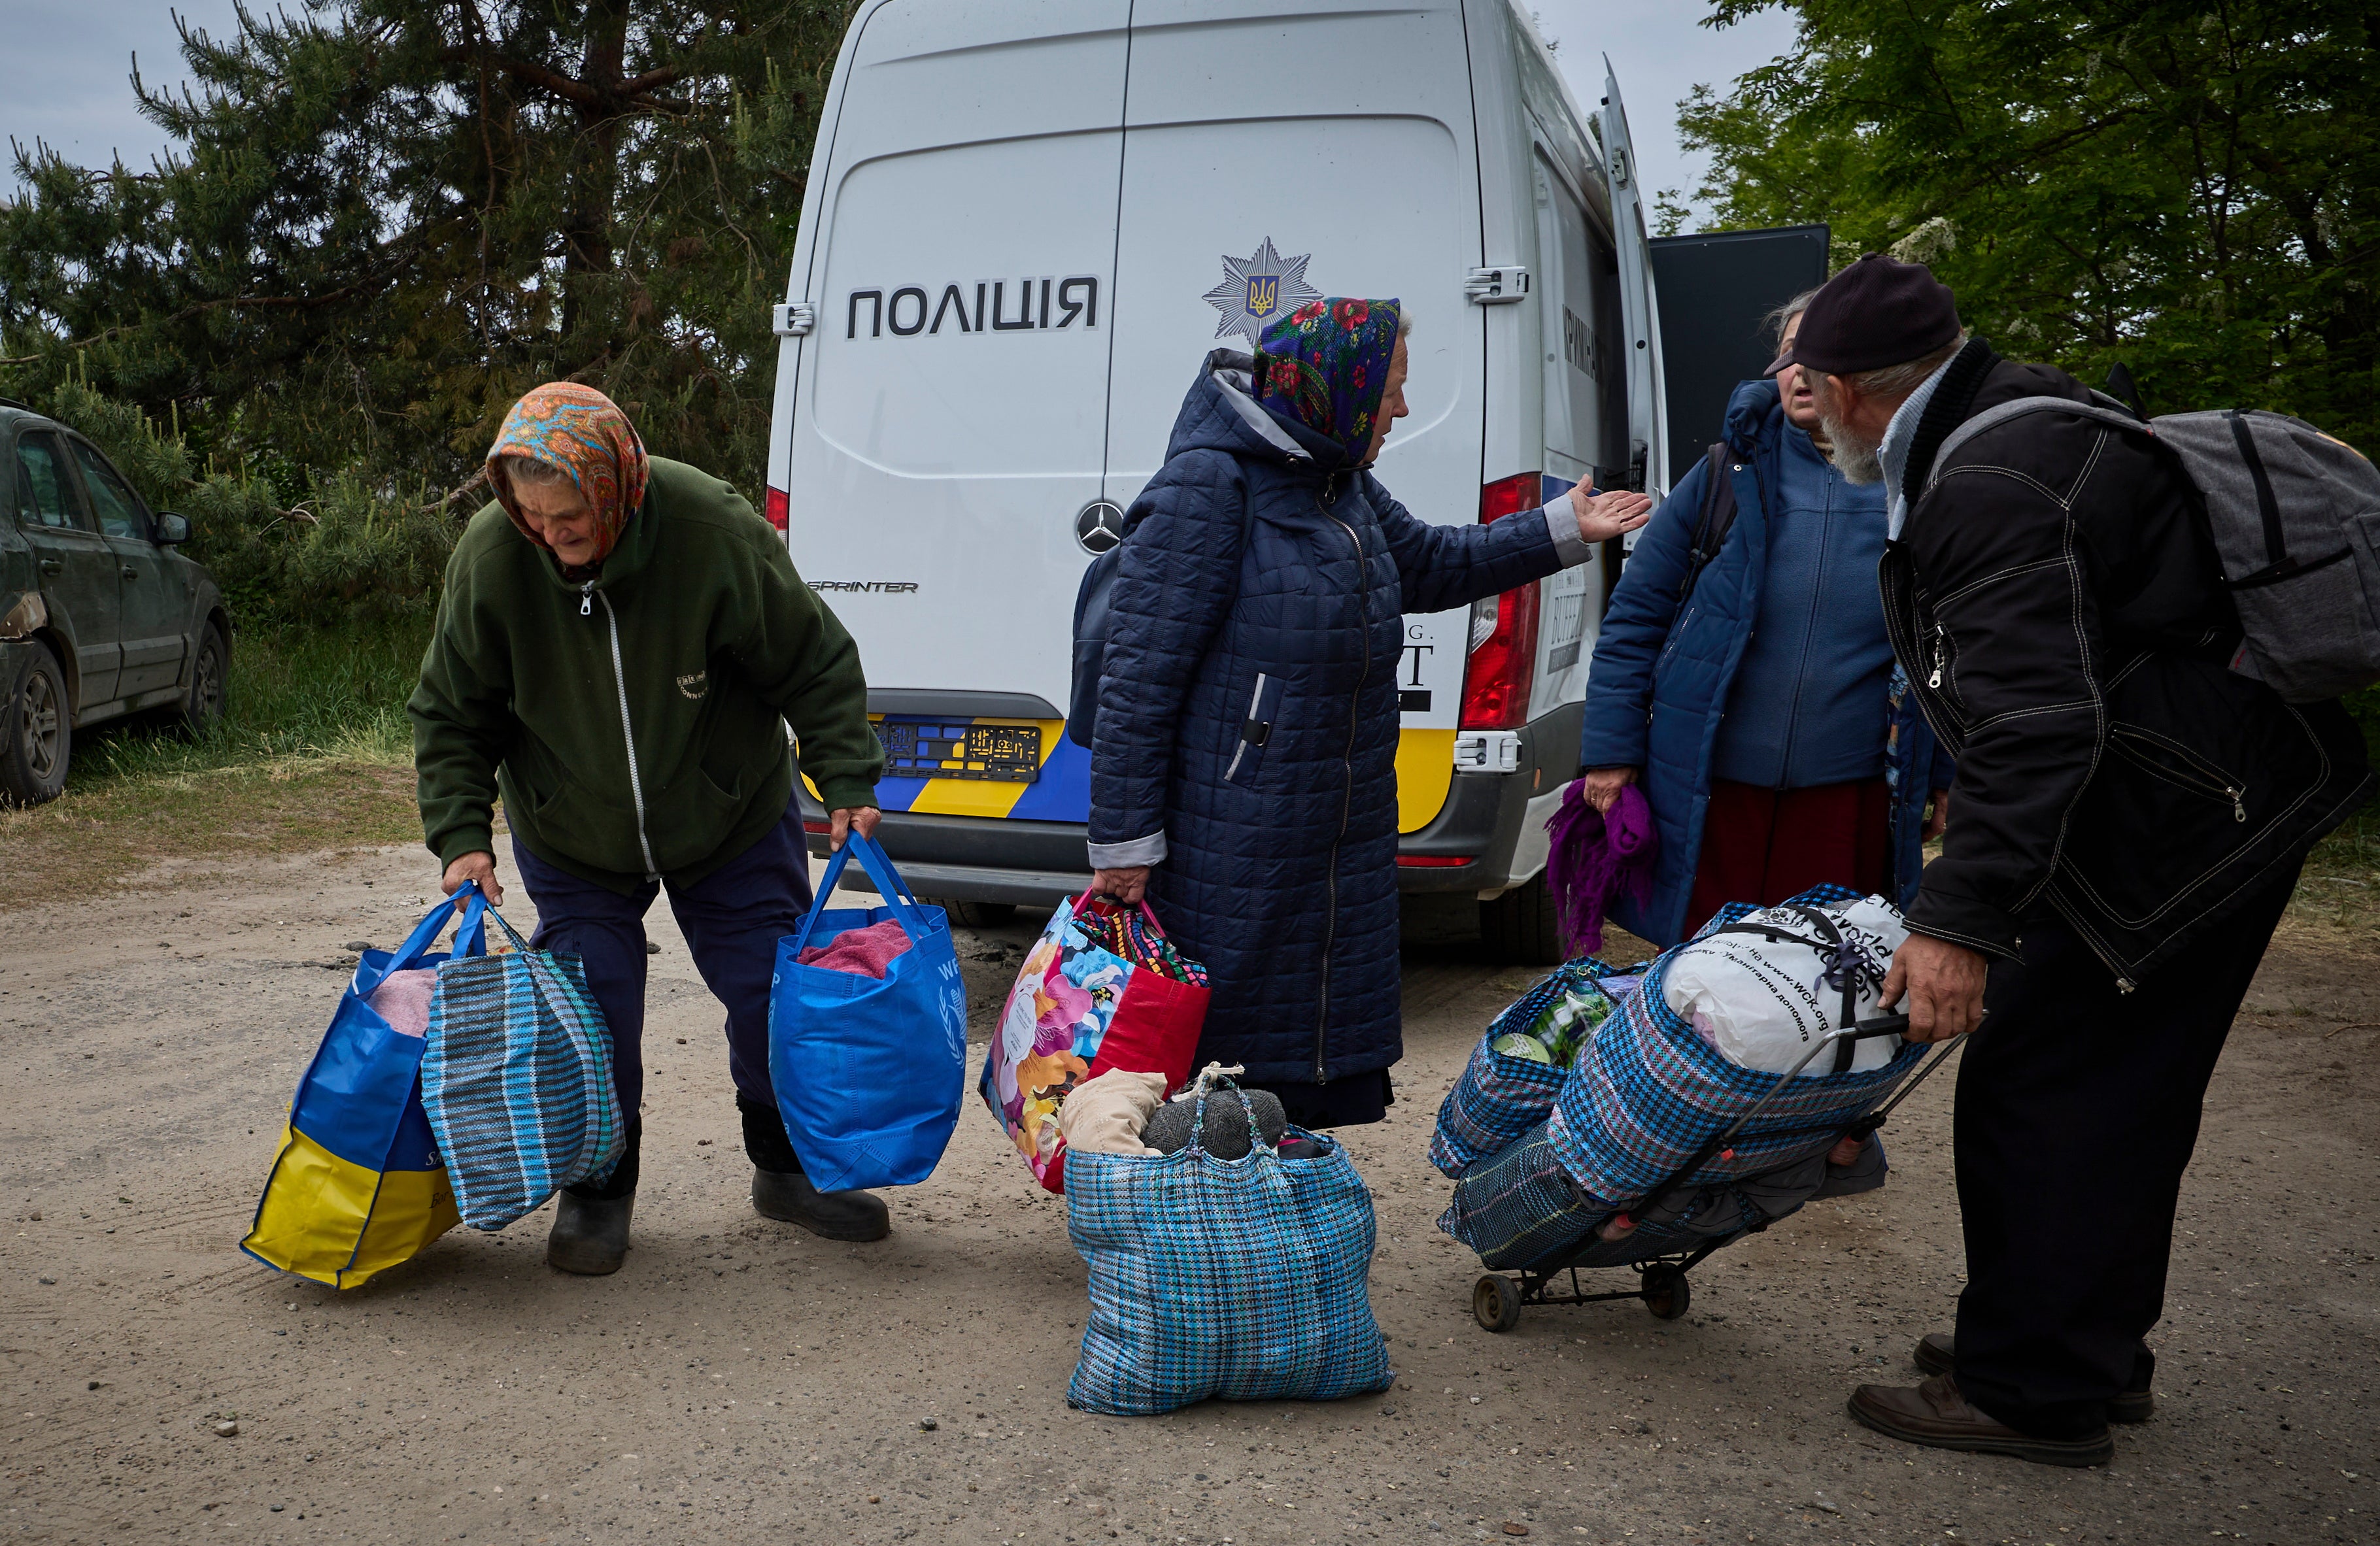 People gather at a mobile evacuation center at an undisclosed location in Kharkiv